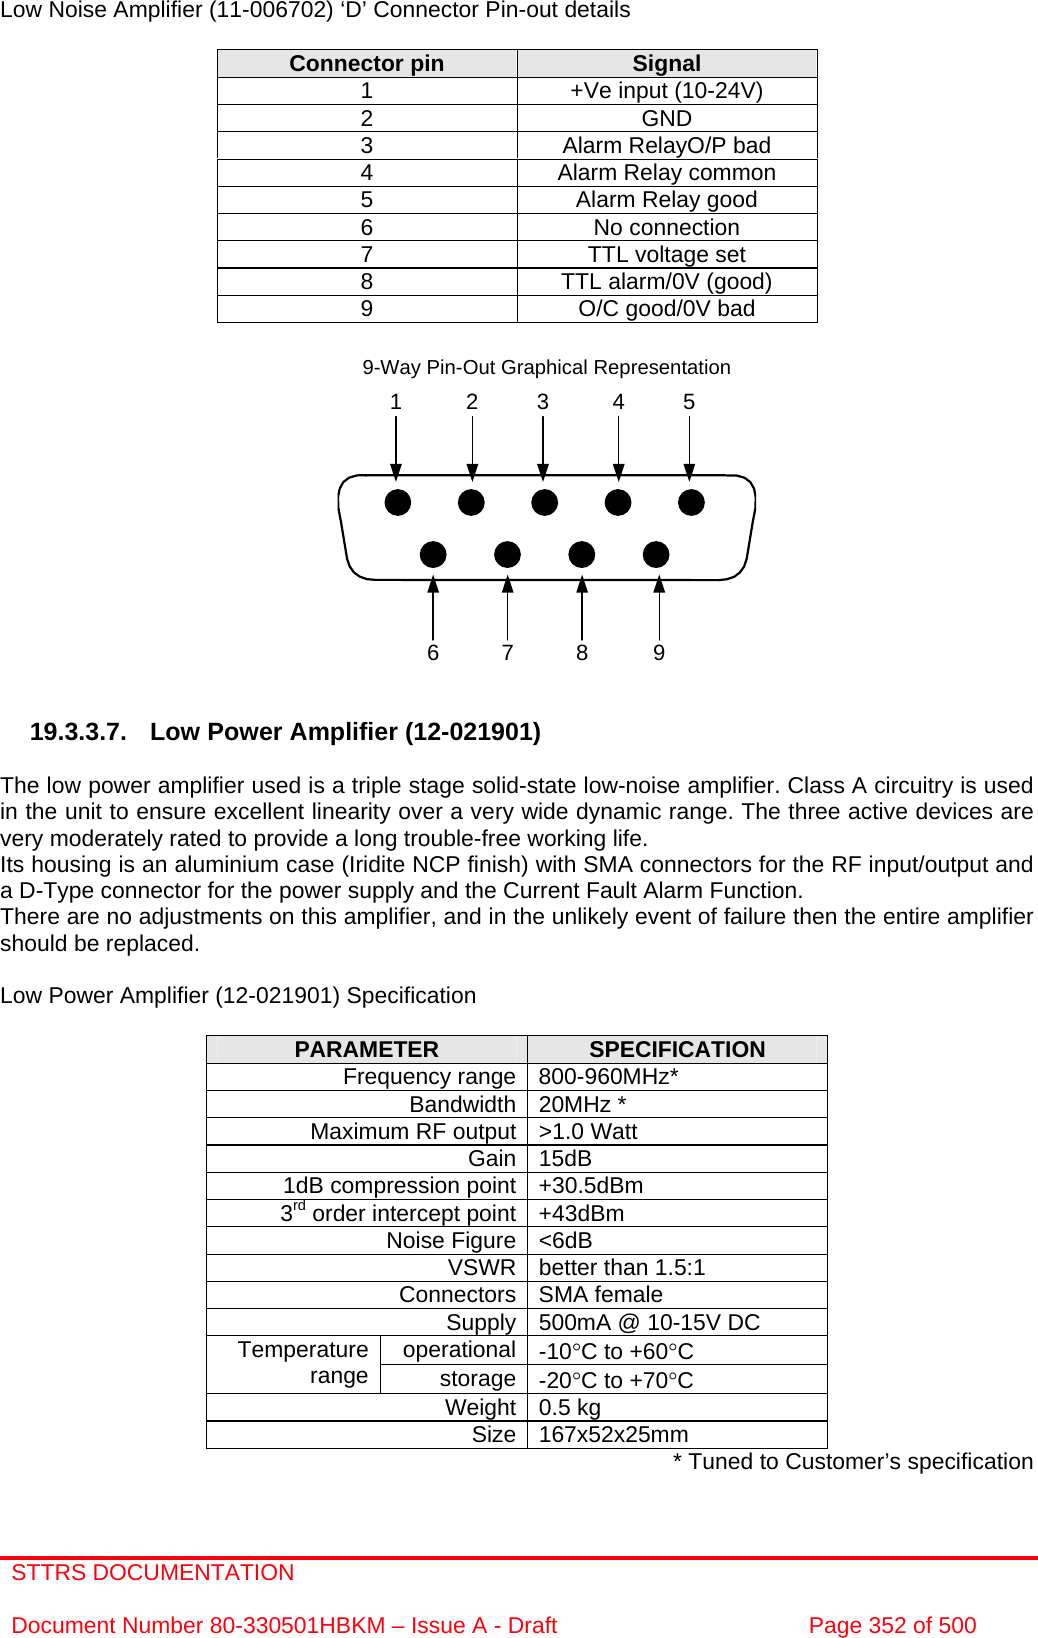 STTRS DOCUMENTATION  Document Number 80-330501HBKM – Issue A - Draft  Page 352 of 500  7 8 961 2 3 4 59-Way Pin-Out Graphical Representation Low Noise Amplifier (11-006702) ‘D’ Connector Pin-out details  Connector pin  Signal 1  +Ve input (10-24V) 2 GND 3  Alarm RelayO/P bad 4  Alarm Relay common 5  Alarm Relay good 6 No connection 7  TTL voltage set 8  TTL alarm/0V (good) 9  O/C good/0V bad                19.3.3.7.  Low Power Amplifier (12-021901)  The low power amplifier used is a triple stage solid-state low-noise amplifier. Class A circuitry is used in the unit to ensure excellent linearity over a very wide dynamic range. The three active devices are very moderately rated to provide a long trouble-free working life.  Its housing is an aluminium case (Iridite NCP finish) with SMA connectors for the RF input/output and a D-Type connector for the power supply and the Current Fault Alarm Function. There are no adjustments on this amplifier, and in the unlikely event of failure then the entire amplifier should be replaced.  Low Power Amplifier (12-021901) Specification  PARAMETER  SPECIFICATION Frequency range 800-960MHz* Bandwidth 20MHz * Maximum RF output &gt;1.0 Watt Gain 15dB 1dB compression point +30.5dBm 3rd order intercept point +43dBm Noise Figure &lt;6dB VSWR better than 1.5:1 Connectors SMA female Supply 500mA @ 10-15V DC operational -10°C to +60°C Temperature range  storage -20°C to +70°C Weight 0.5 kg Size 167x52x25mm * Tuned to Customer’s specification 